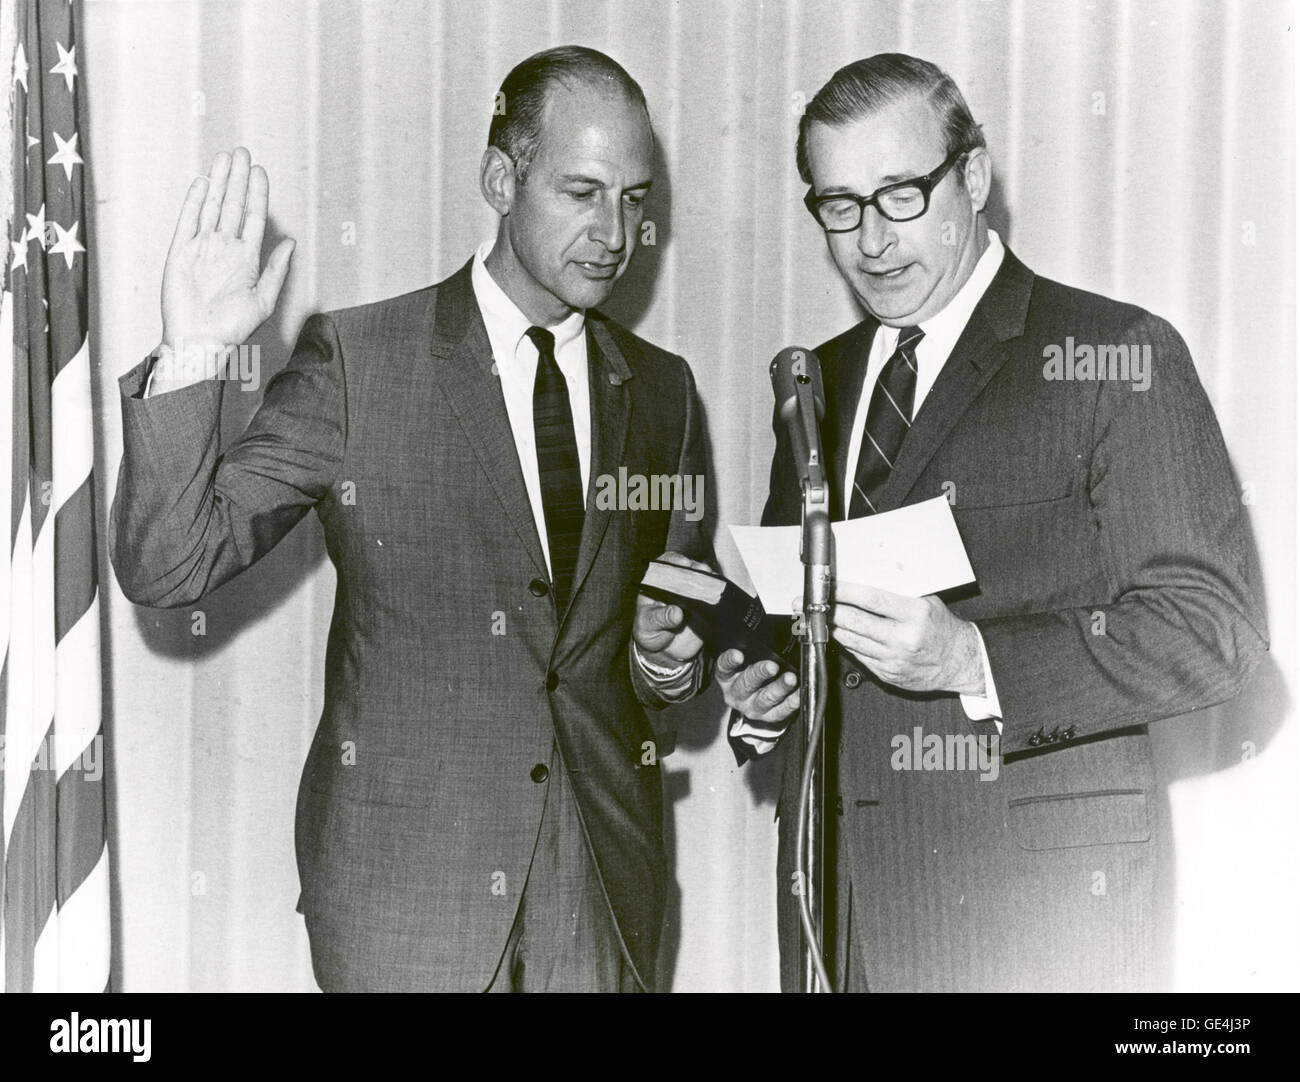 Swearing in of George M. Low as Deputy Administrator of NASA. The 43-year-old veteran of NASAs Mercury, Gemini, and Apollo manned flight programs was administered the oath of Office by Dr. Thomas O. Paine, NASA's Administrator. President Nixon nominated Low for the post November 13, 1969, and the Senate confirmed him on November 26, 1969. Low, who joined the National Advisory Committee for Aeronautics (NASAs predecessor agency) in 1949, was the fourth person to hold the Deputy Administrator post at NASA.  Image # : 69-H-2010 Stock Photo